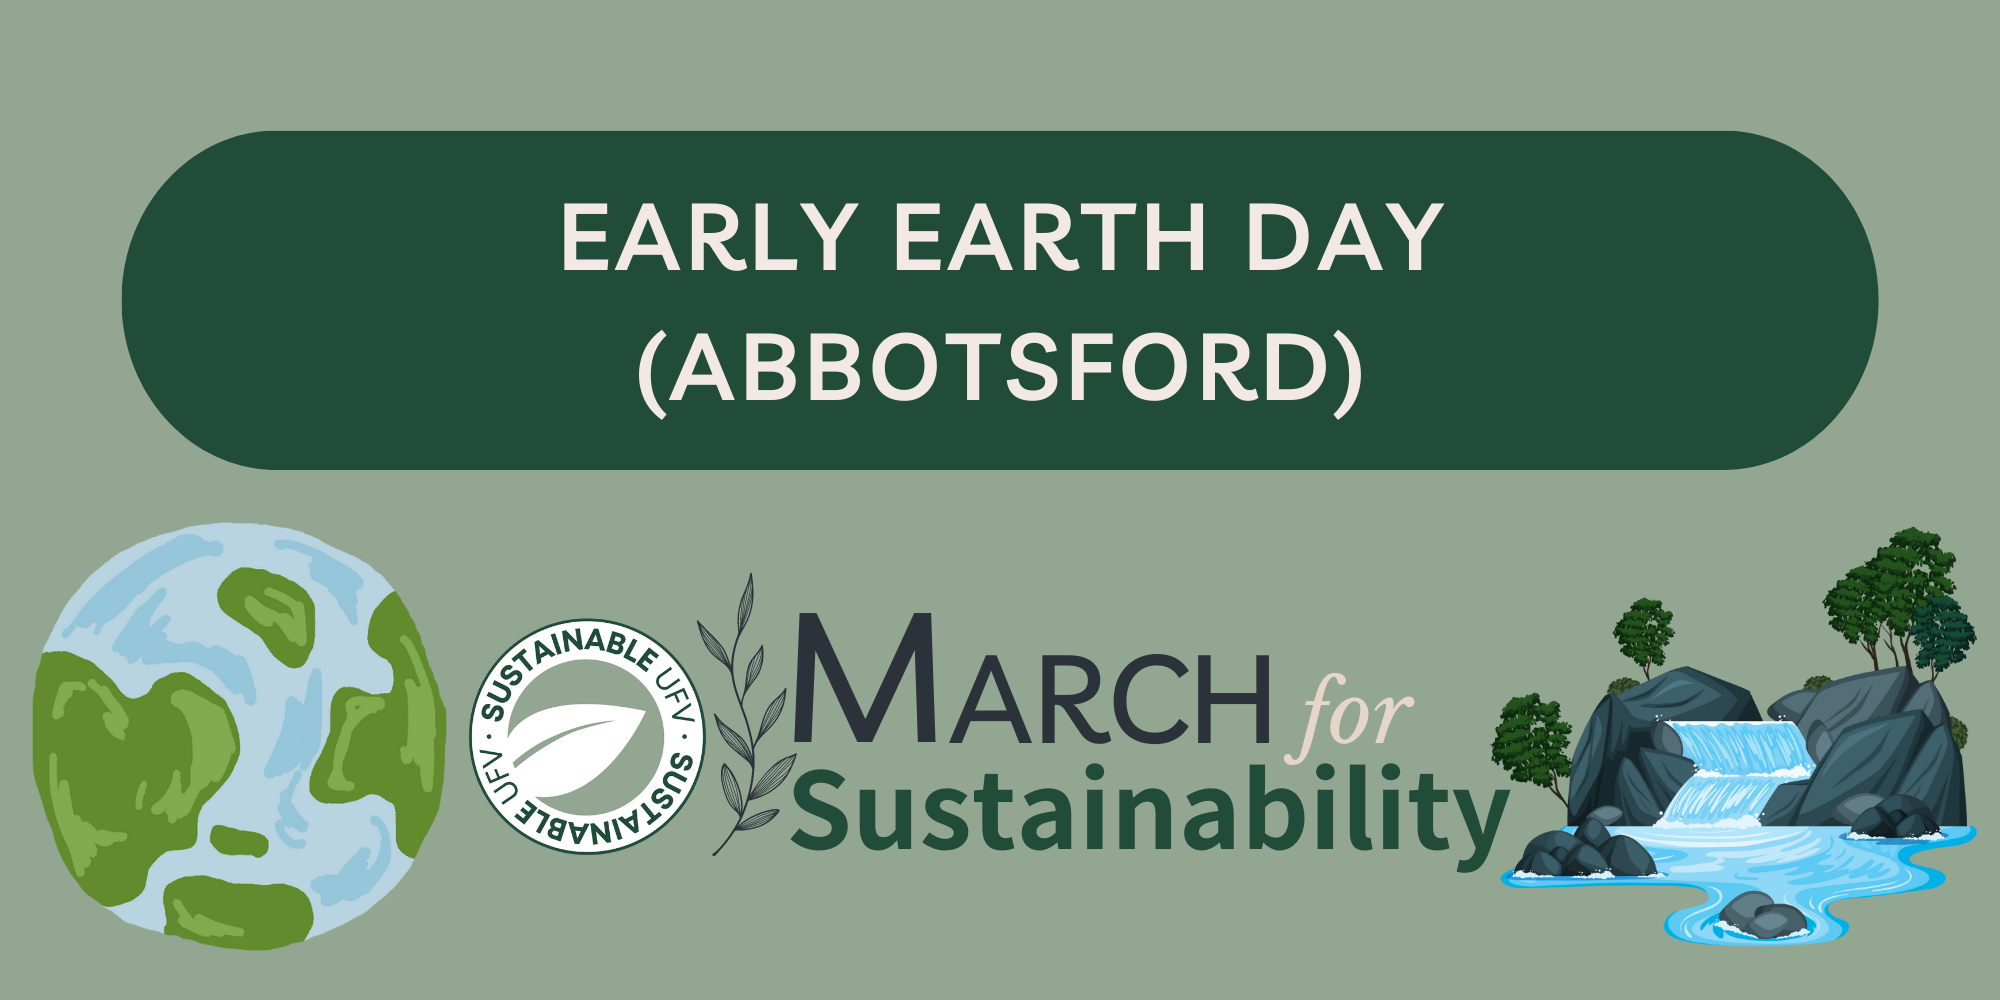 Early Earth Day (Abbotsford)